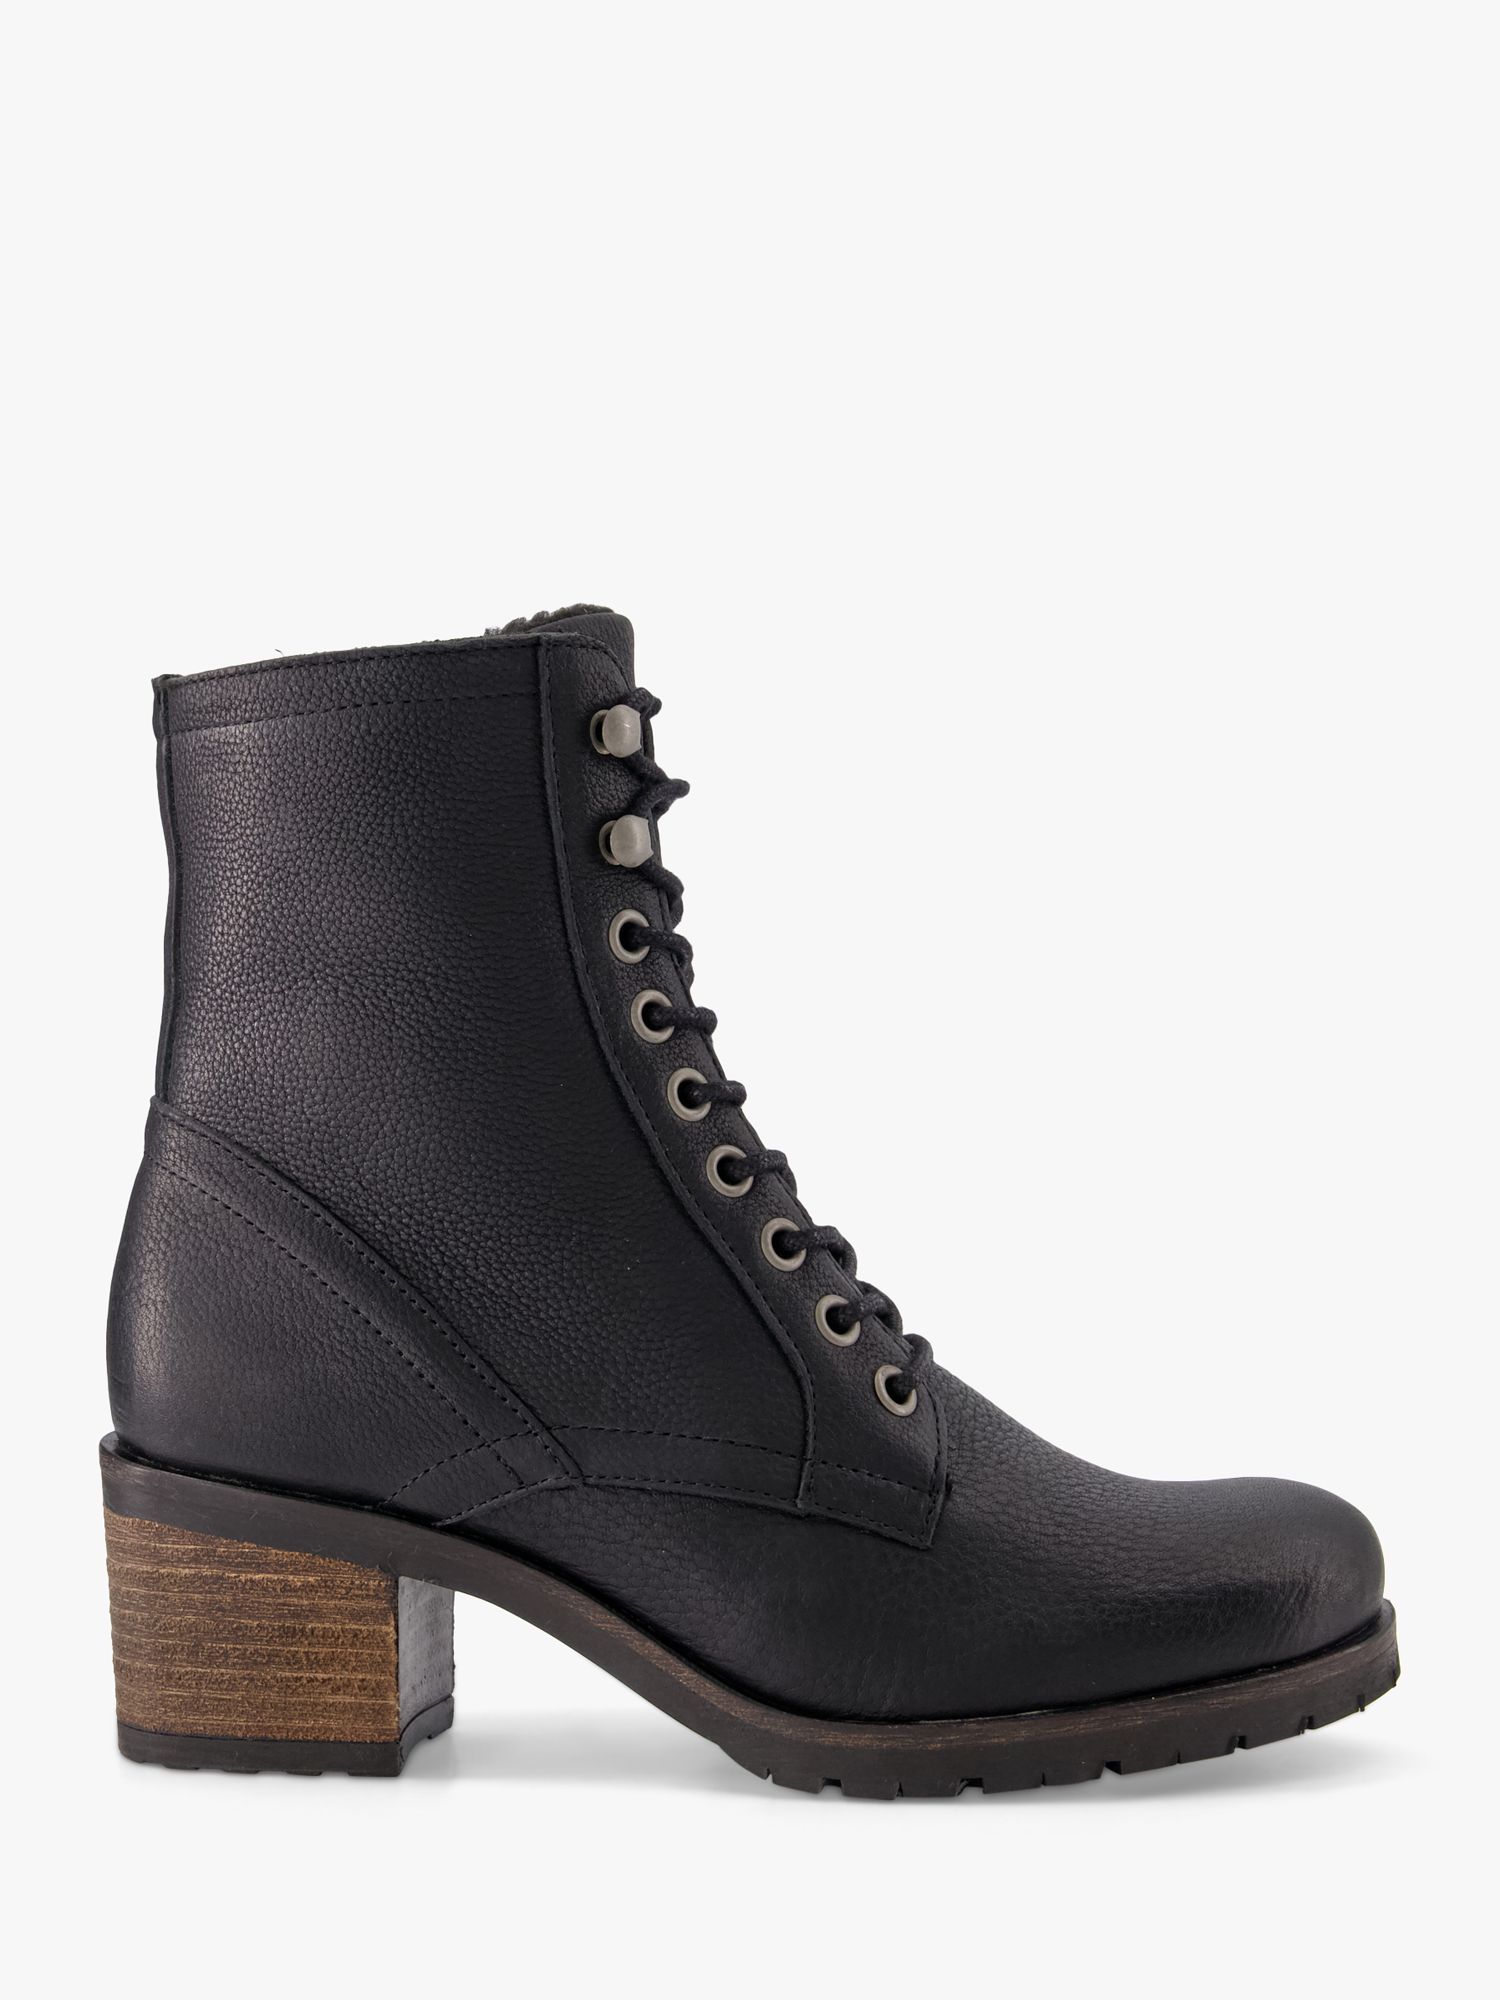 Dune Parson Leather Lace Up Ankle Boots, Black